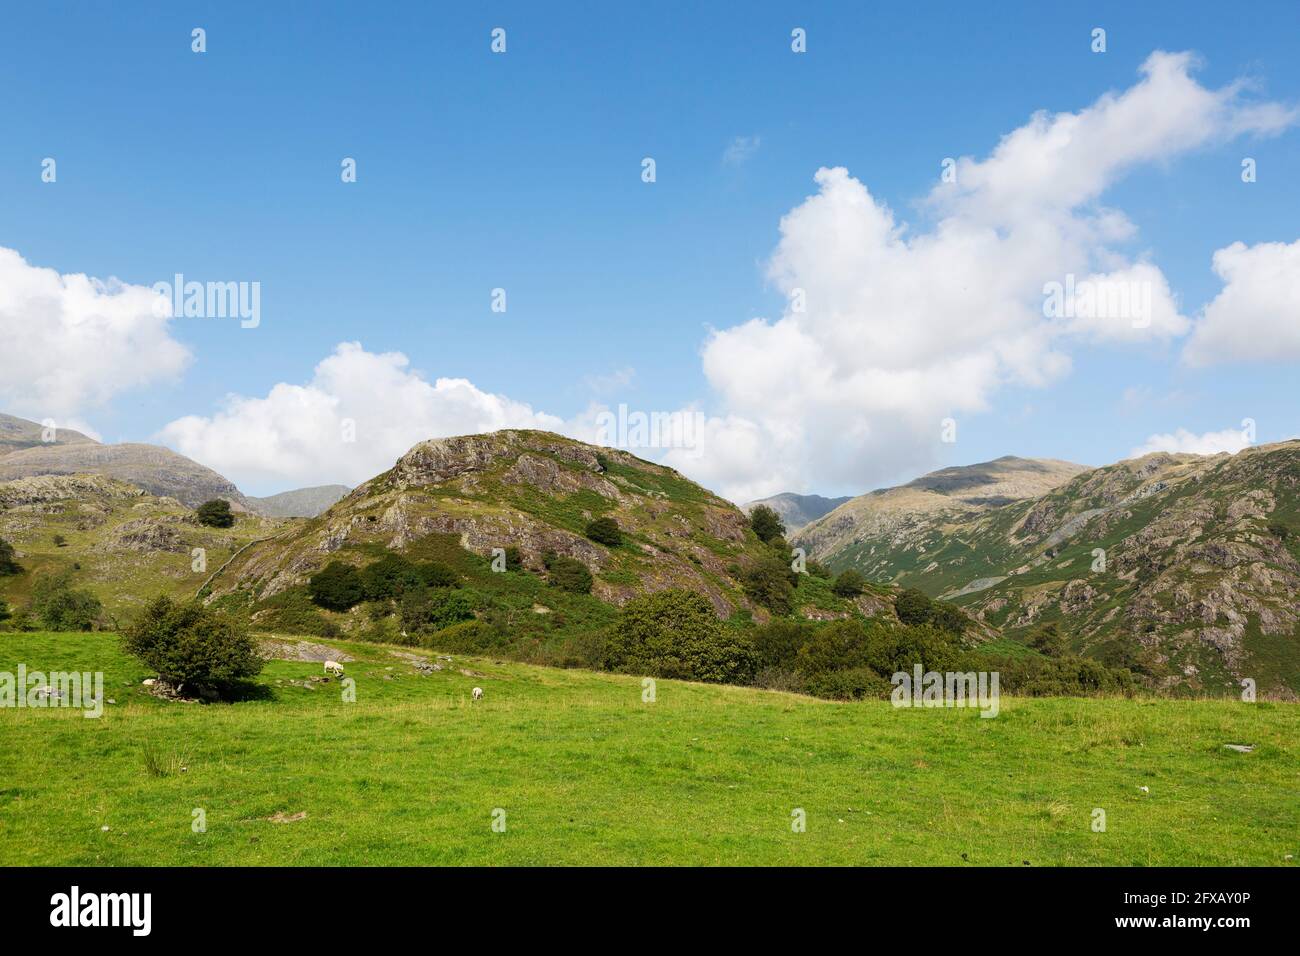 Landscape around the Old Man of Coniston in Cumbria, England. The circular walk to the peak of the Old Man of Coniston is one of the most popular in t Stock Photo